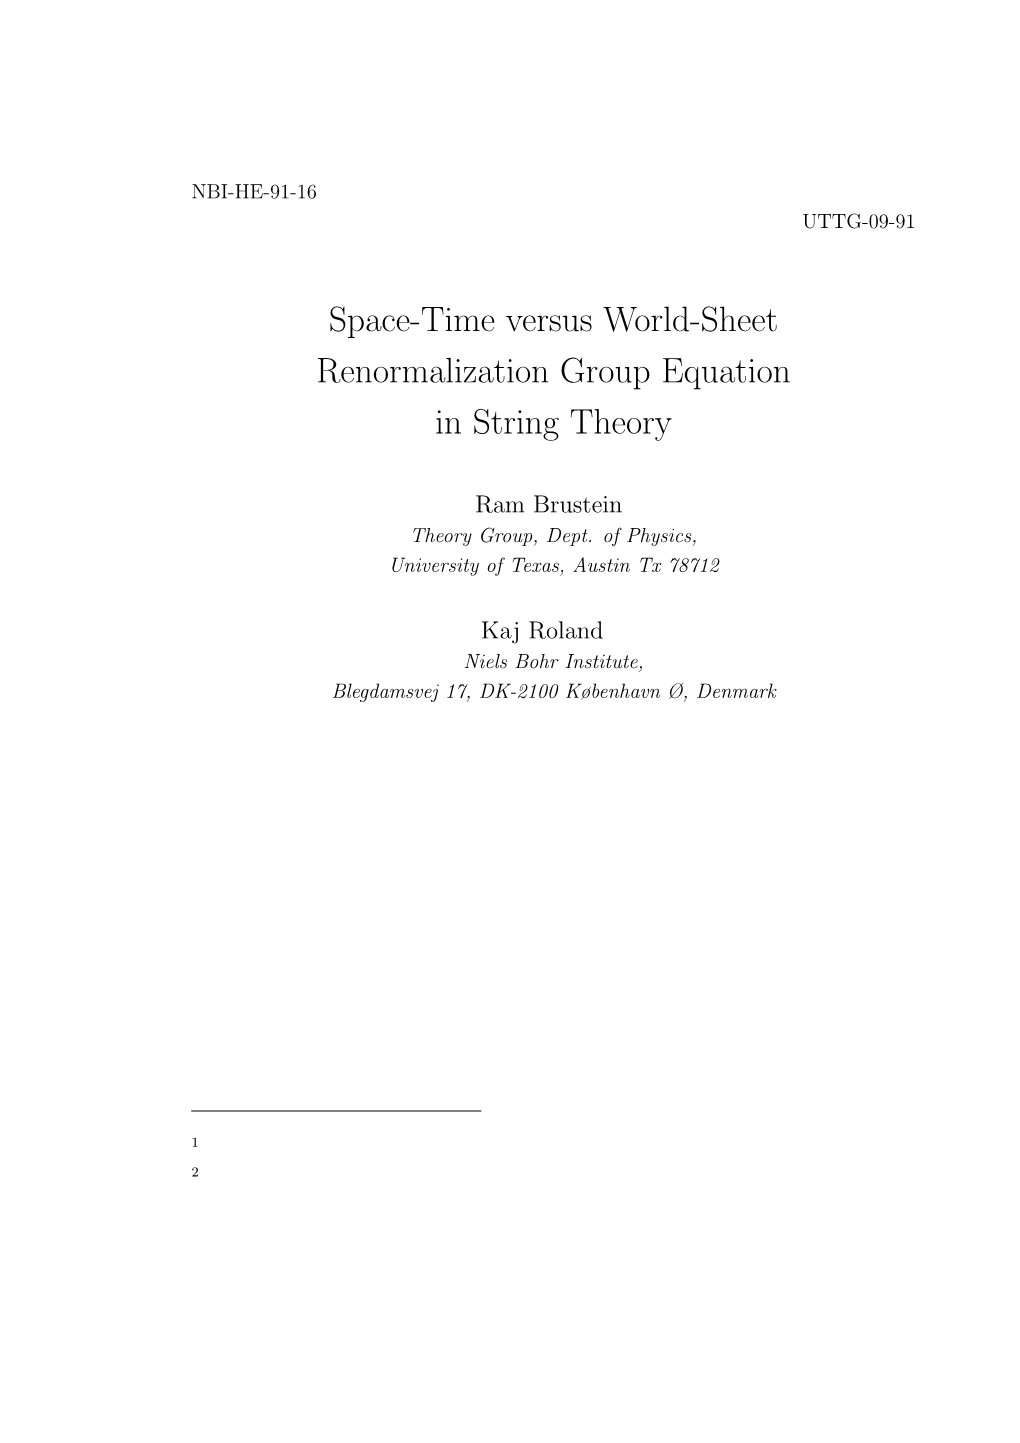 Space-Time Versus World-Sheet Renormalization Group Equation in String Theory